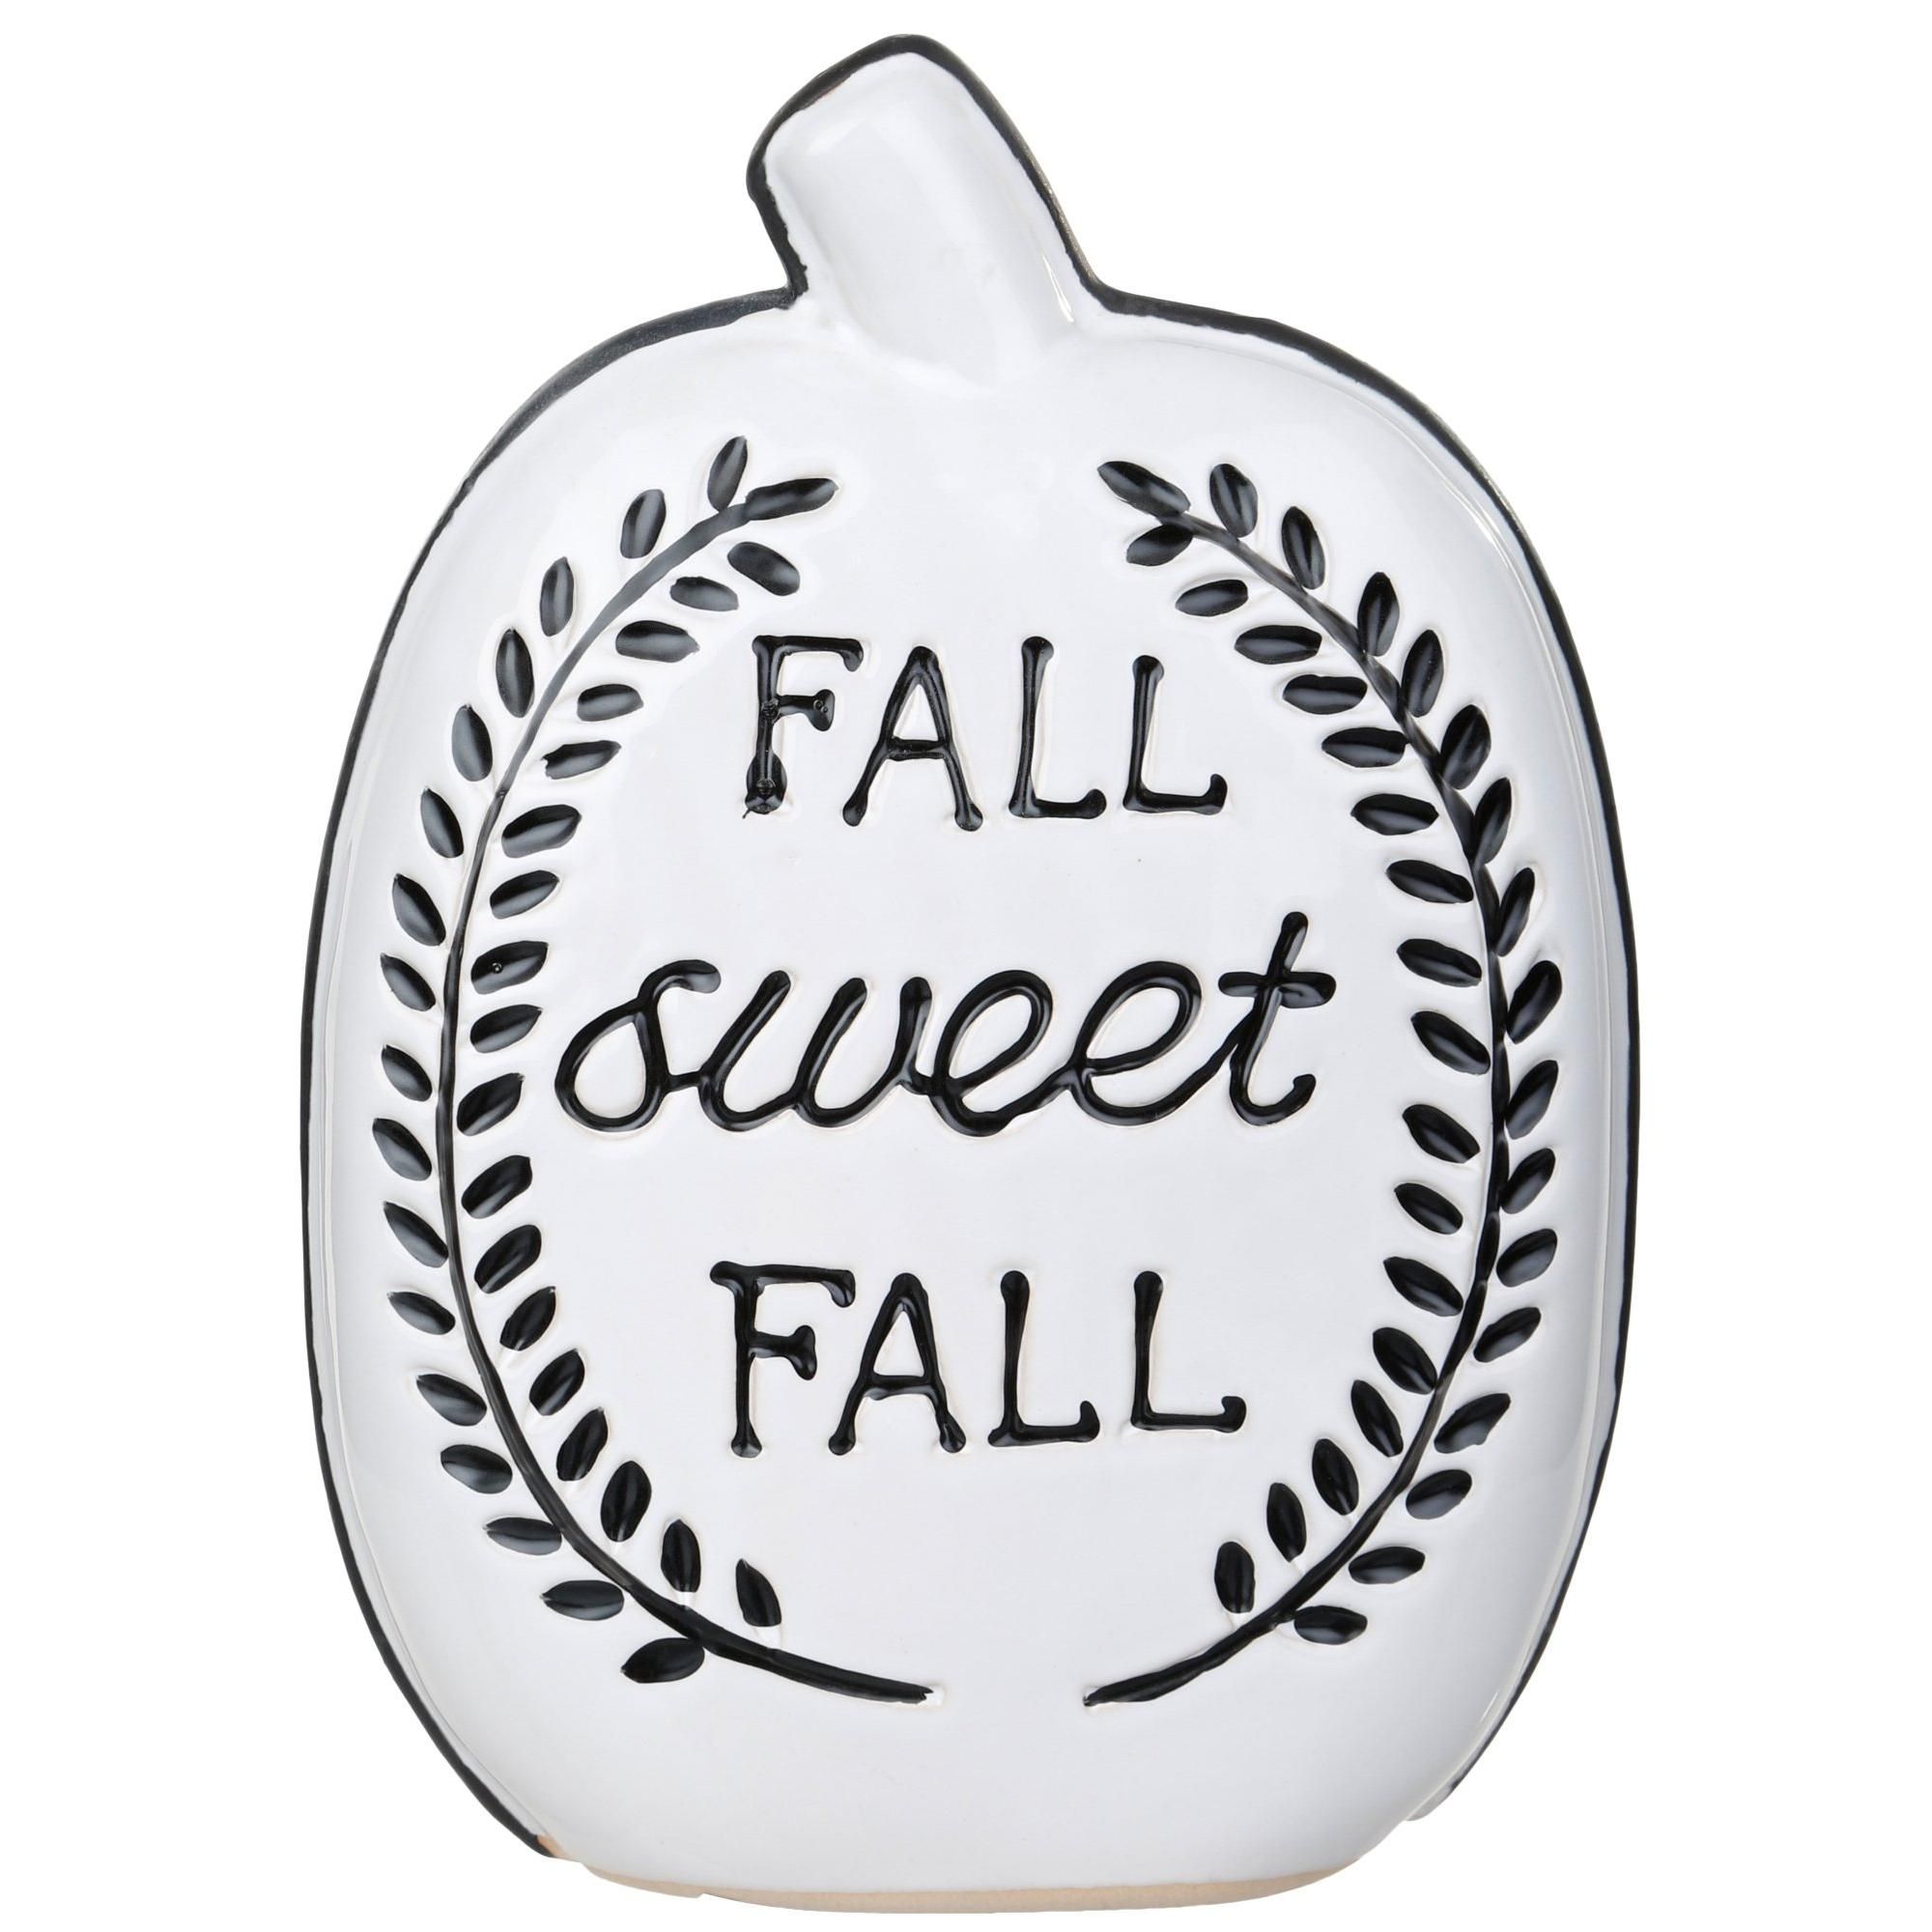 9" Fall Sweet Fall Pumpkin Accent - White-White-7817321808700   | Burkes Outlet | bealls